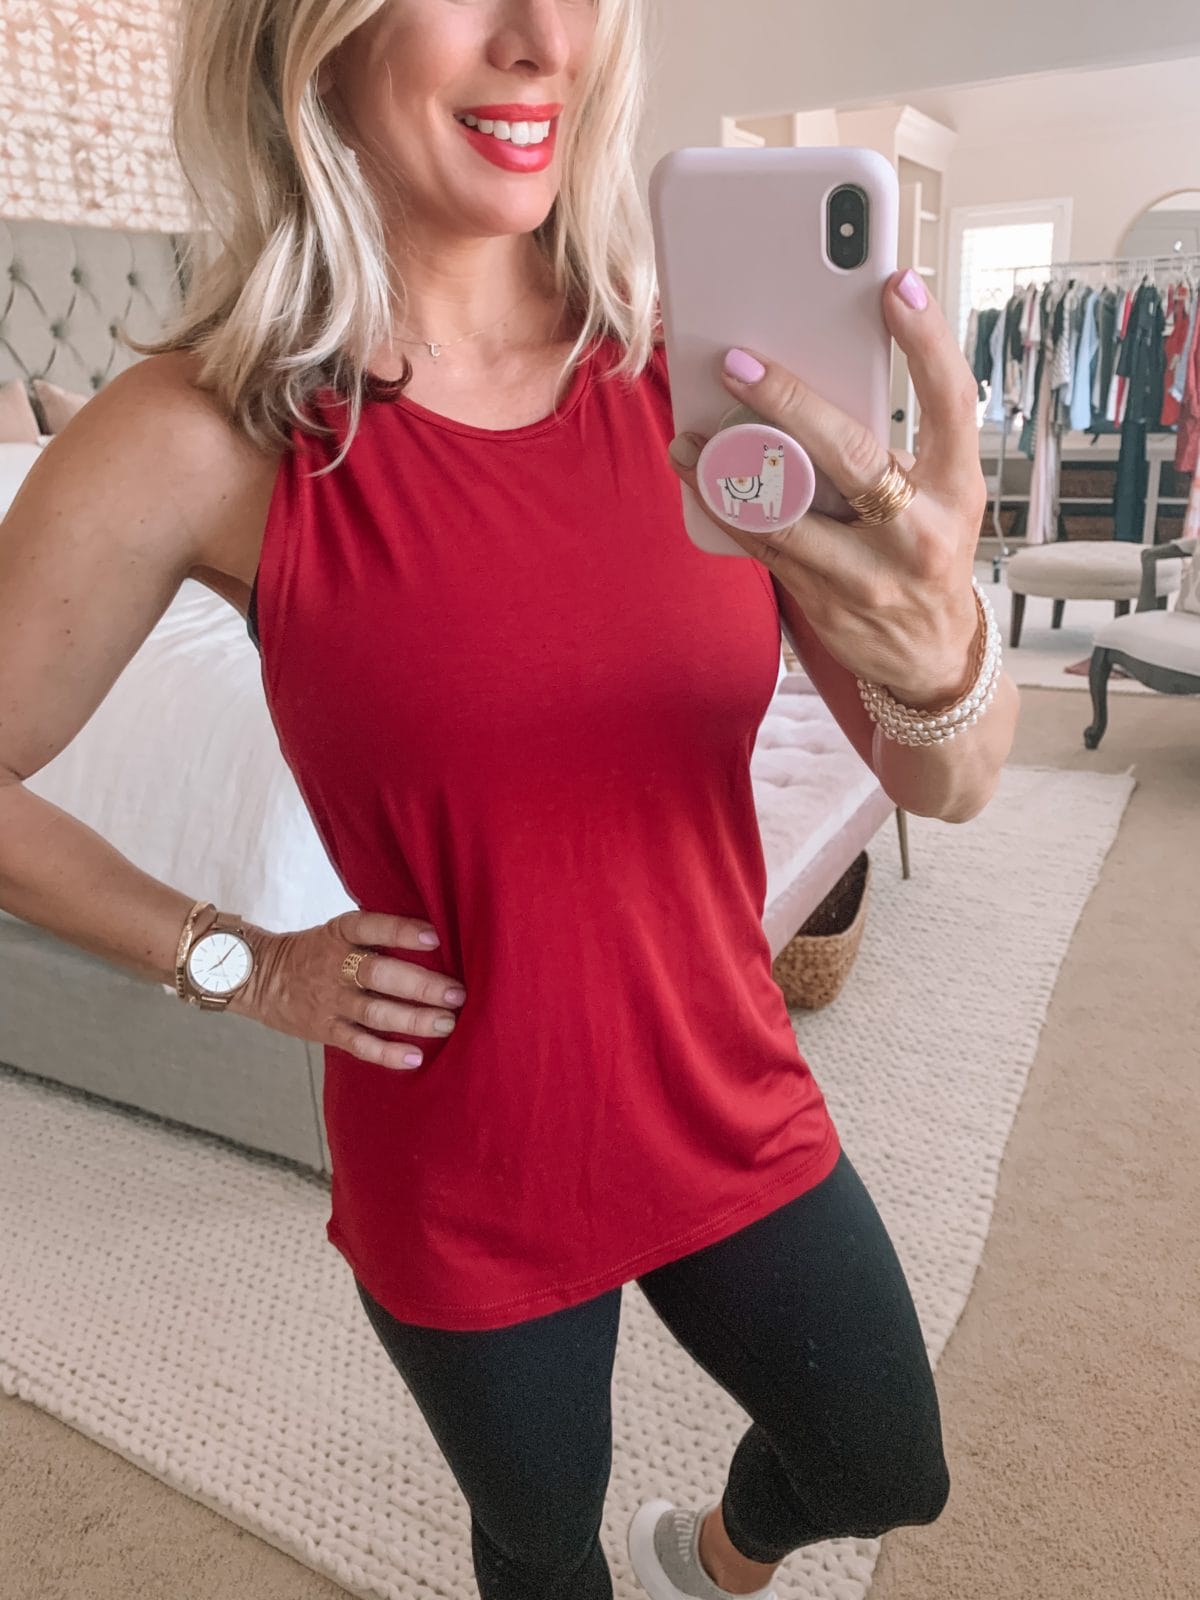 Amazon Fashion Finds, Work Out Tank, Leggings, Adidas Shoes